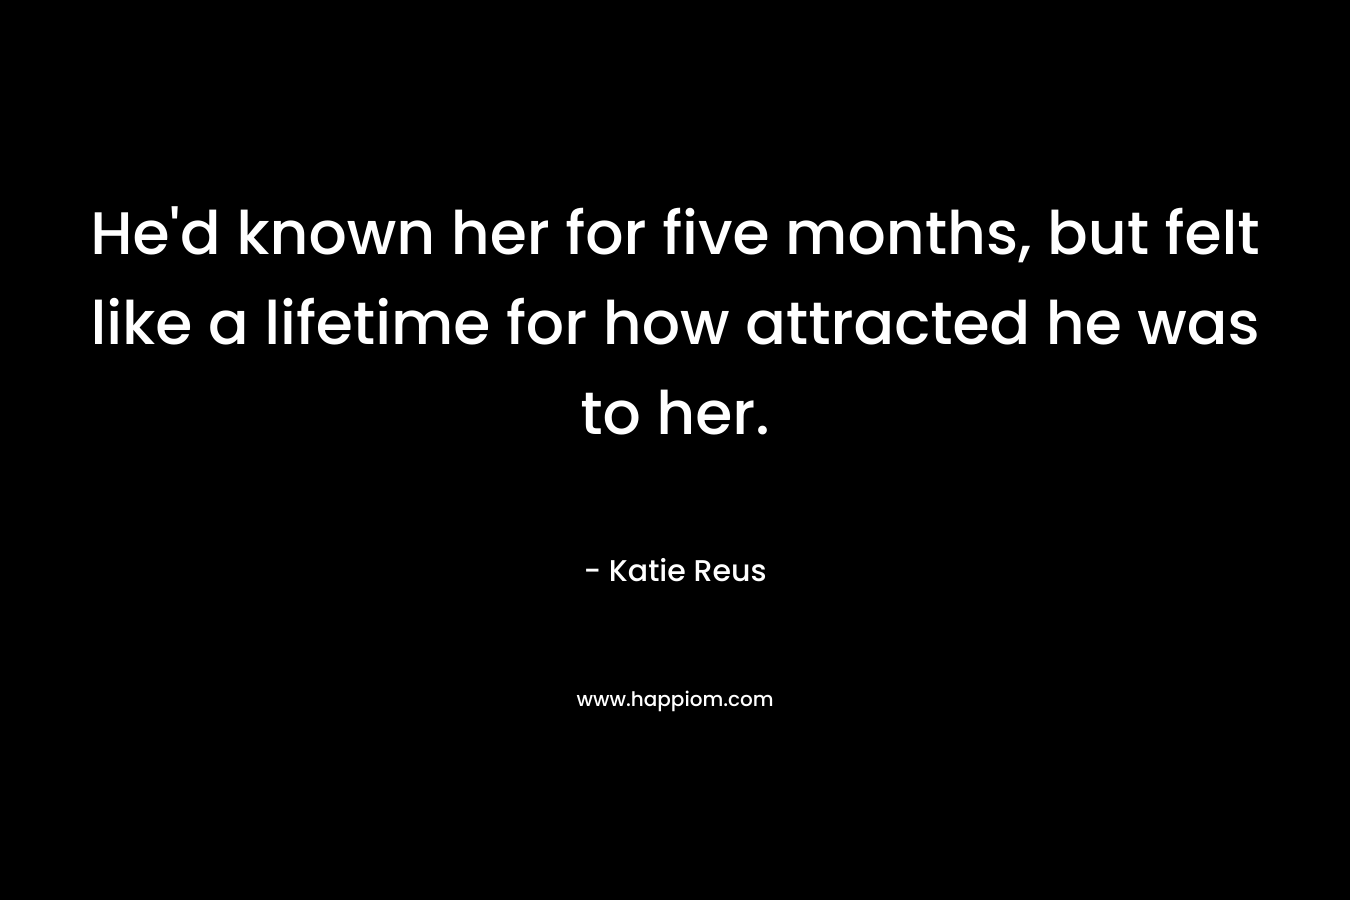 He’d known her for five months, but felt like a lifetime for how attracted he was to her. – Katie Reus